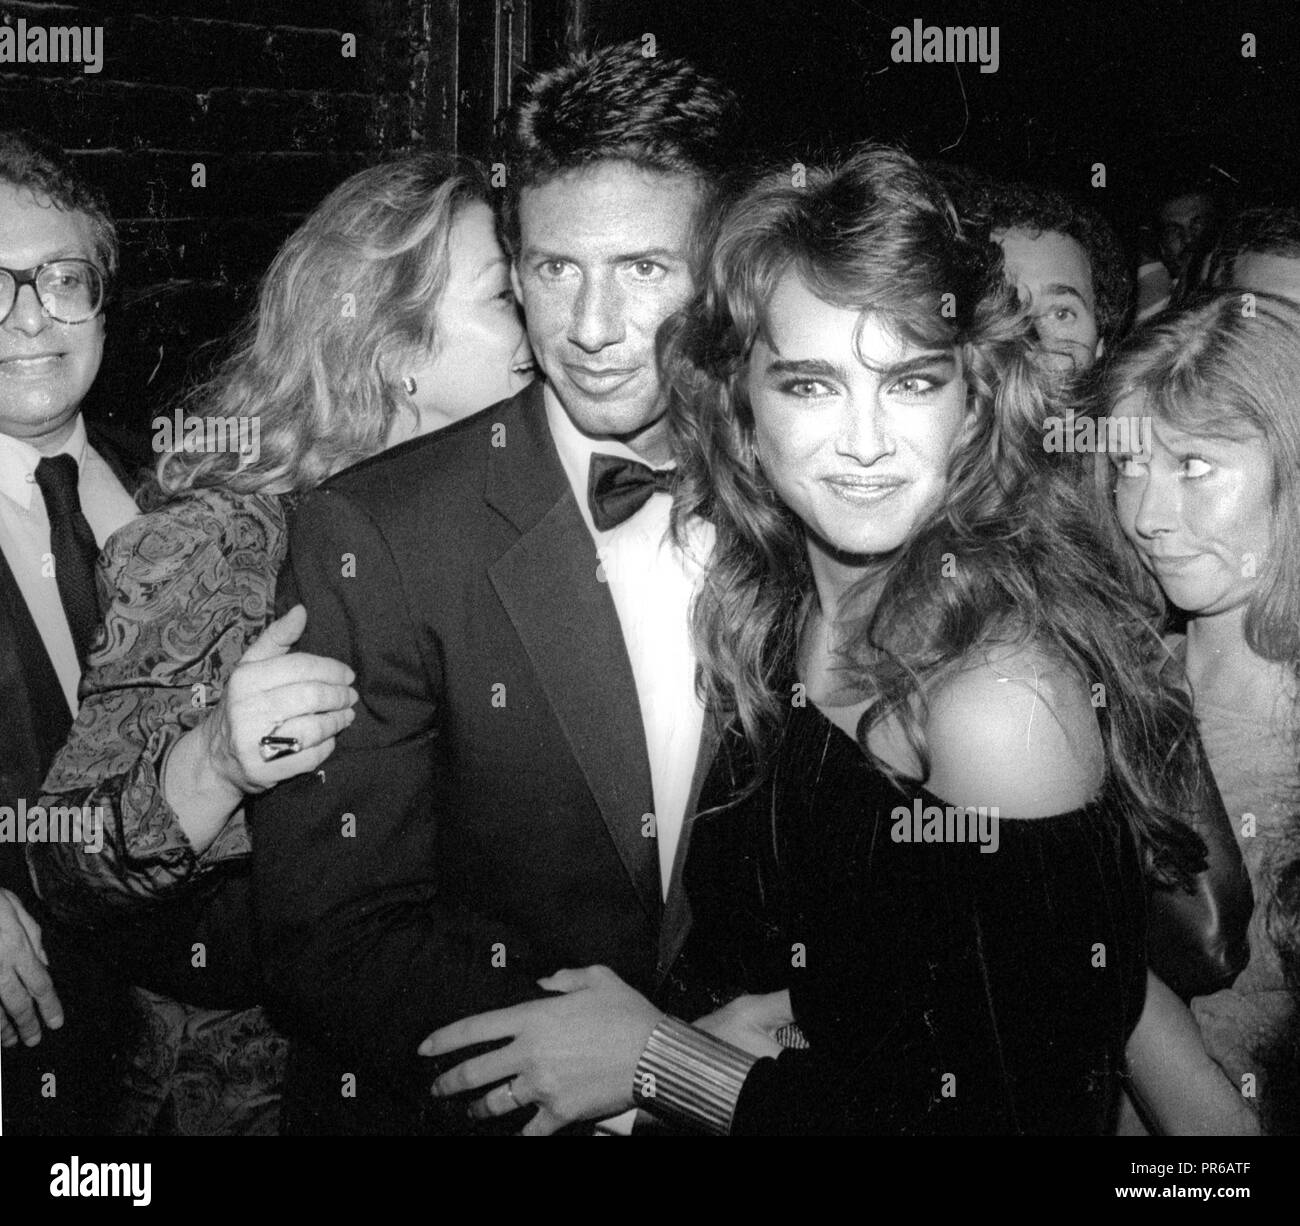 1981 New York City Calvin Klein And Brooke Shields At Studio 54 Credit